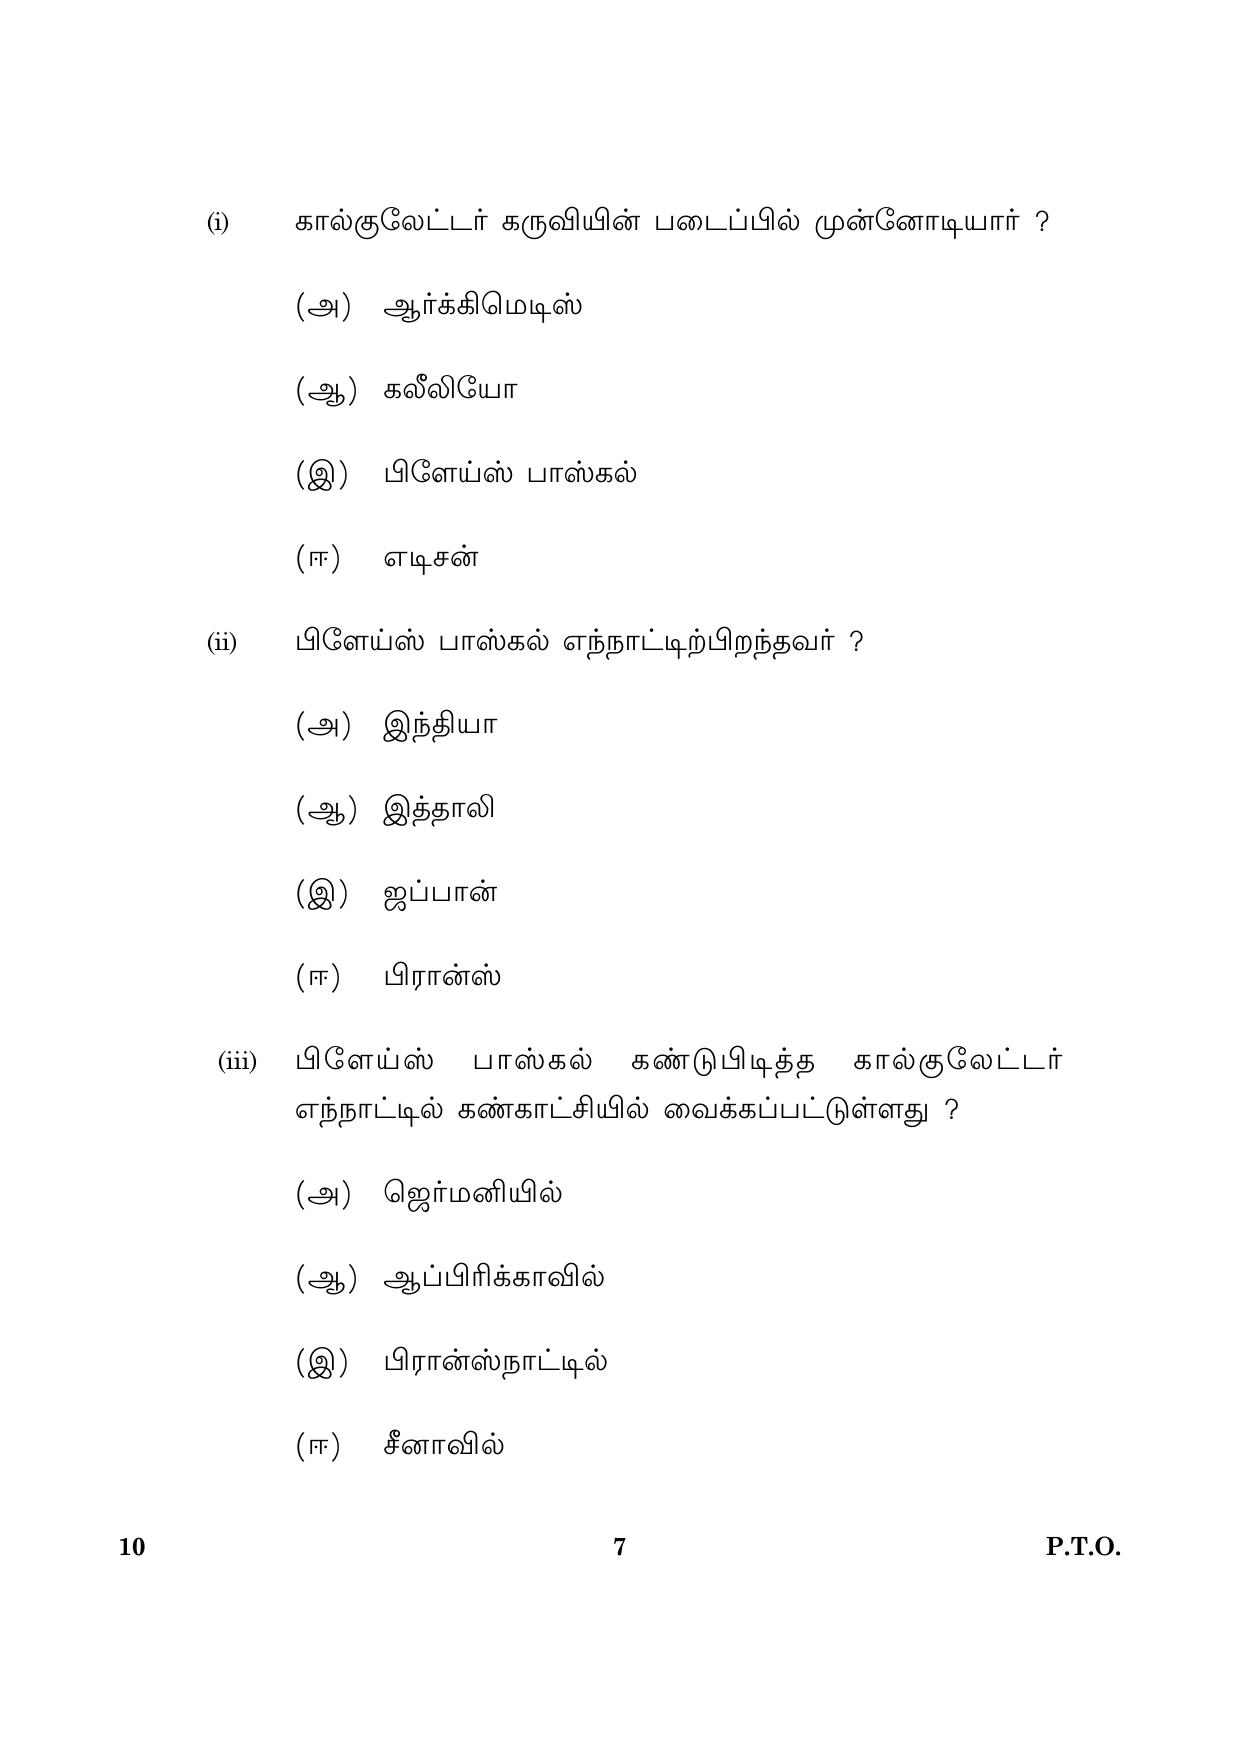 CBSE Class 10 010 Tamil 2016 Question Paper - Page 7